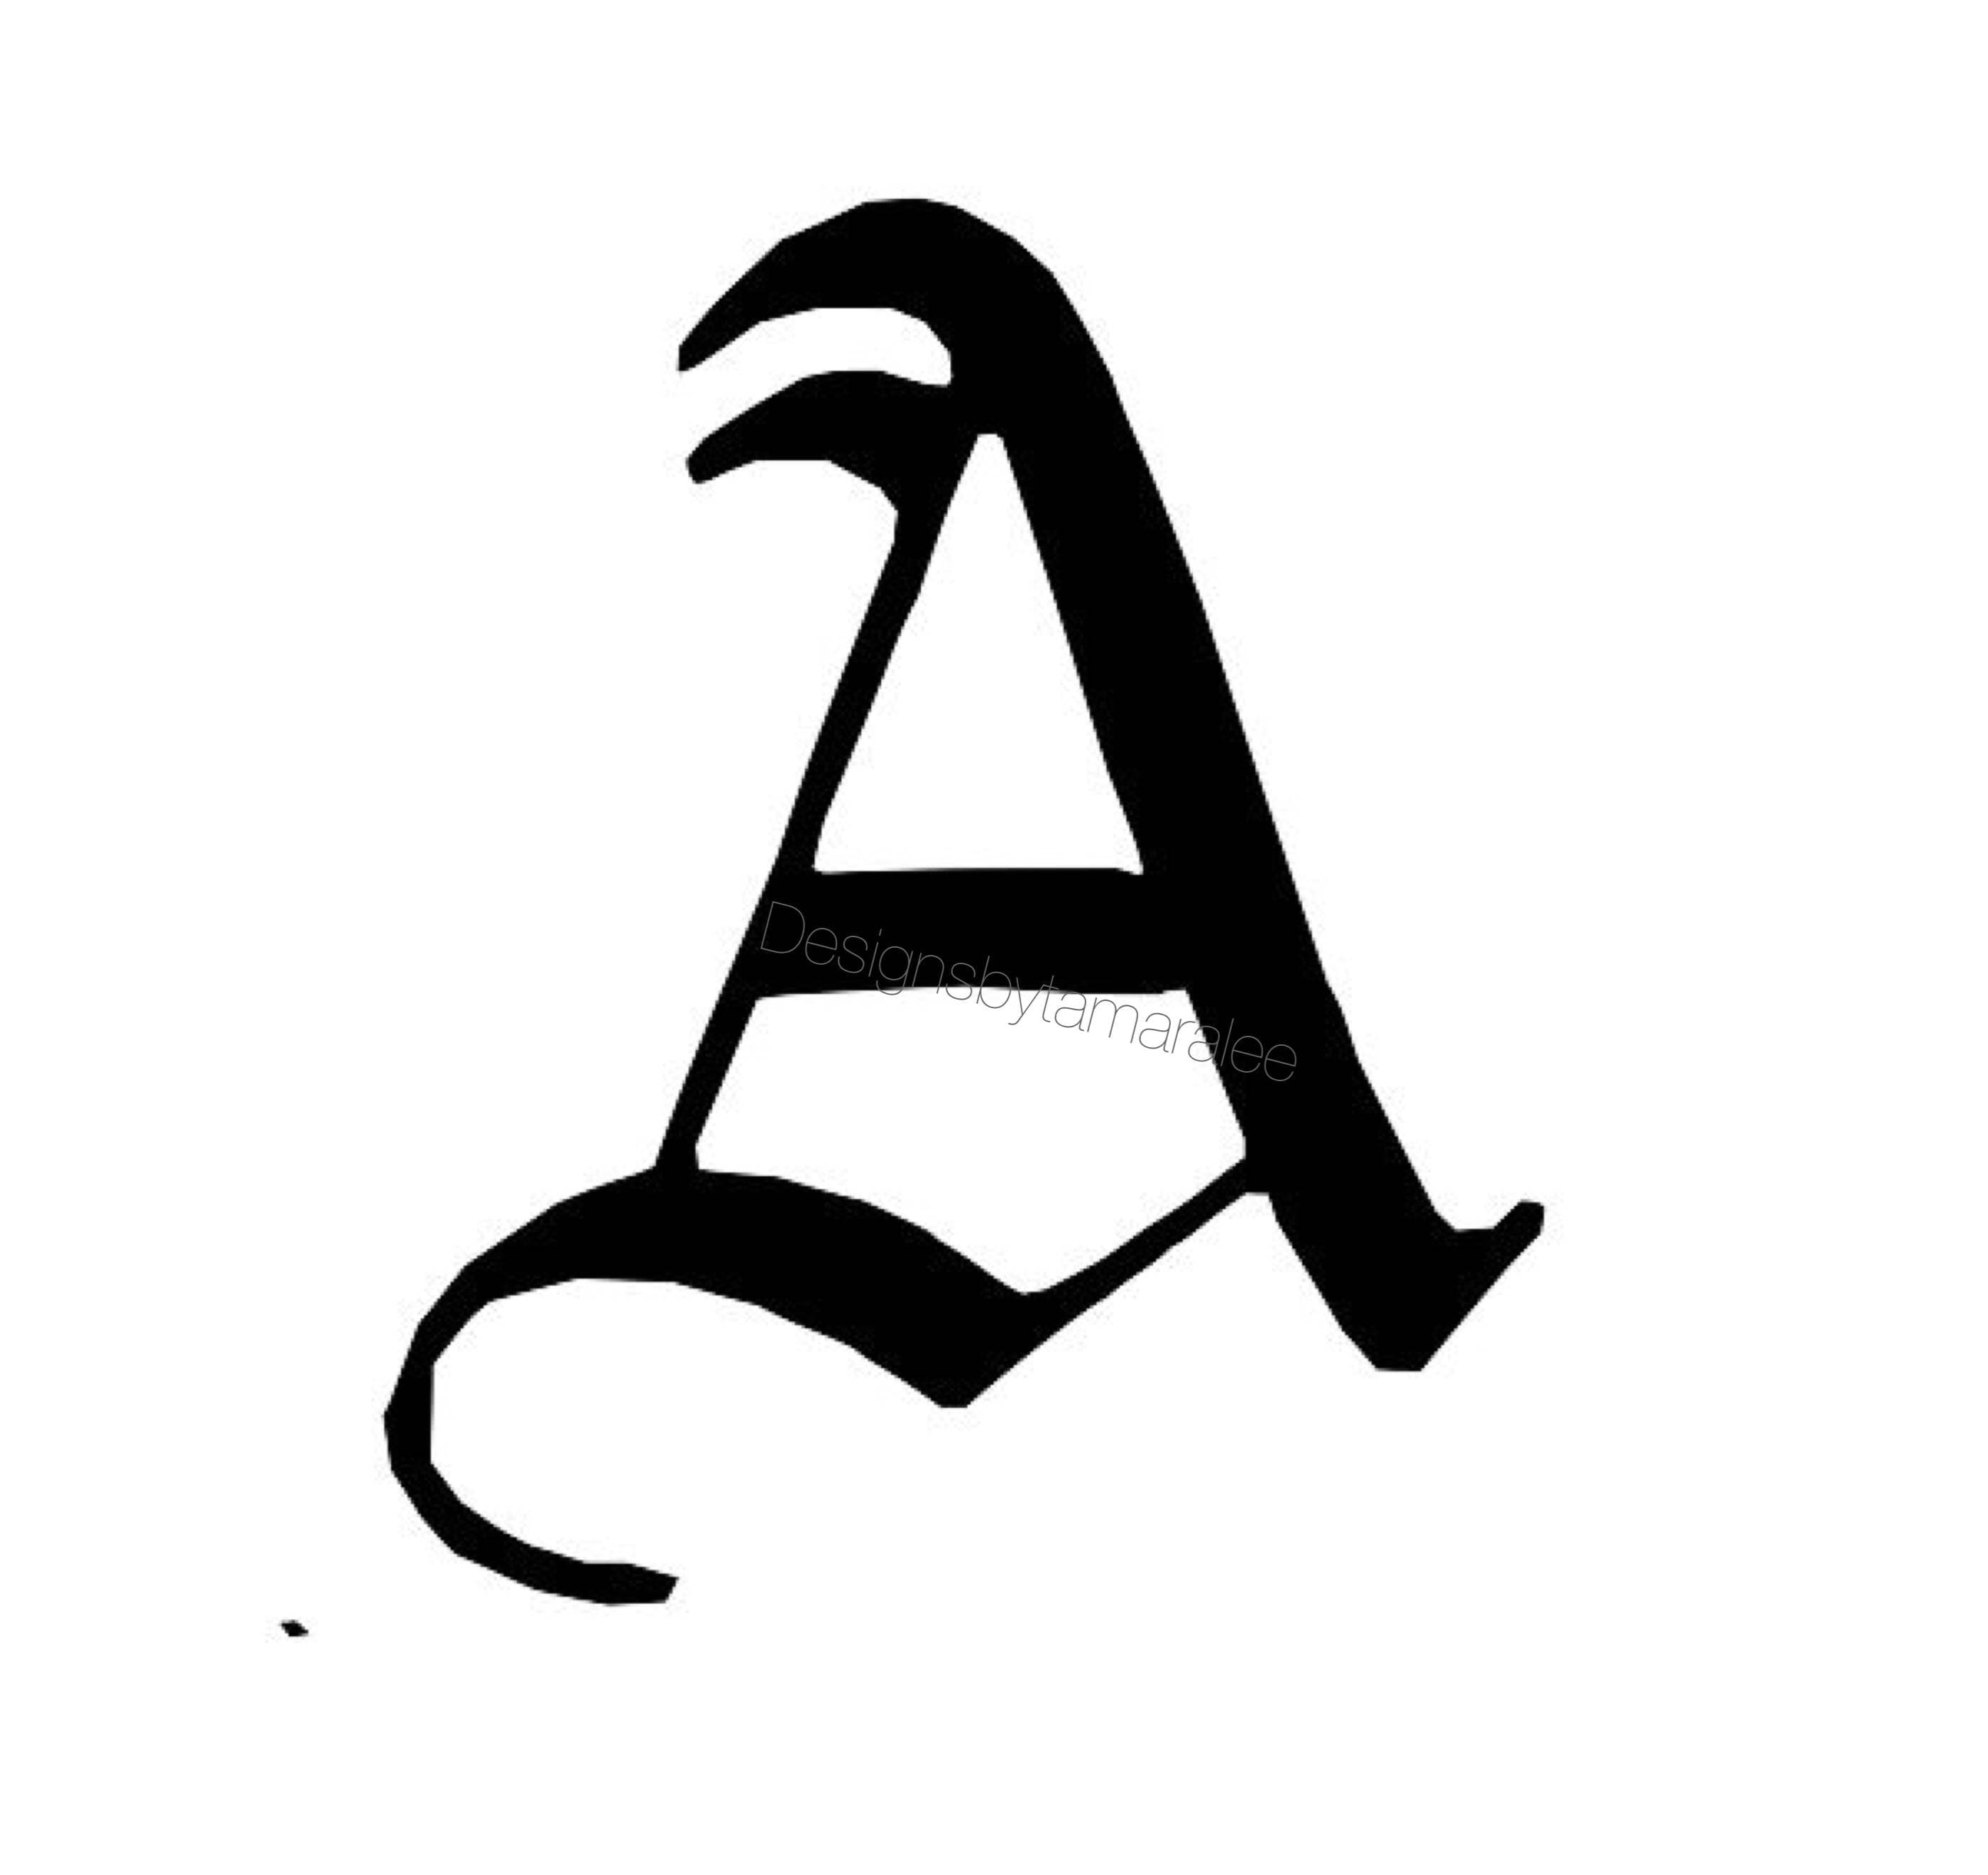 letters in old english font n